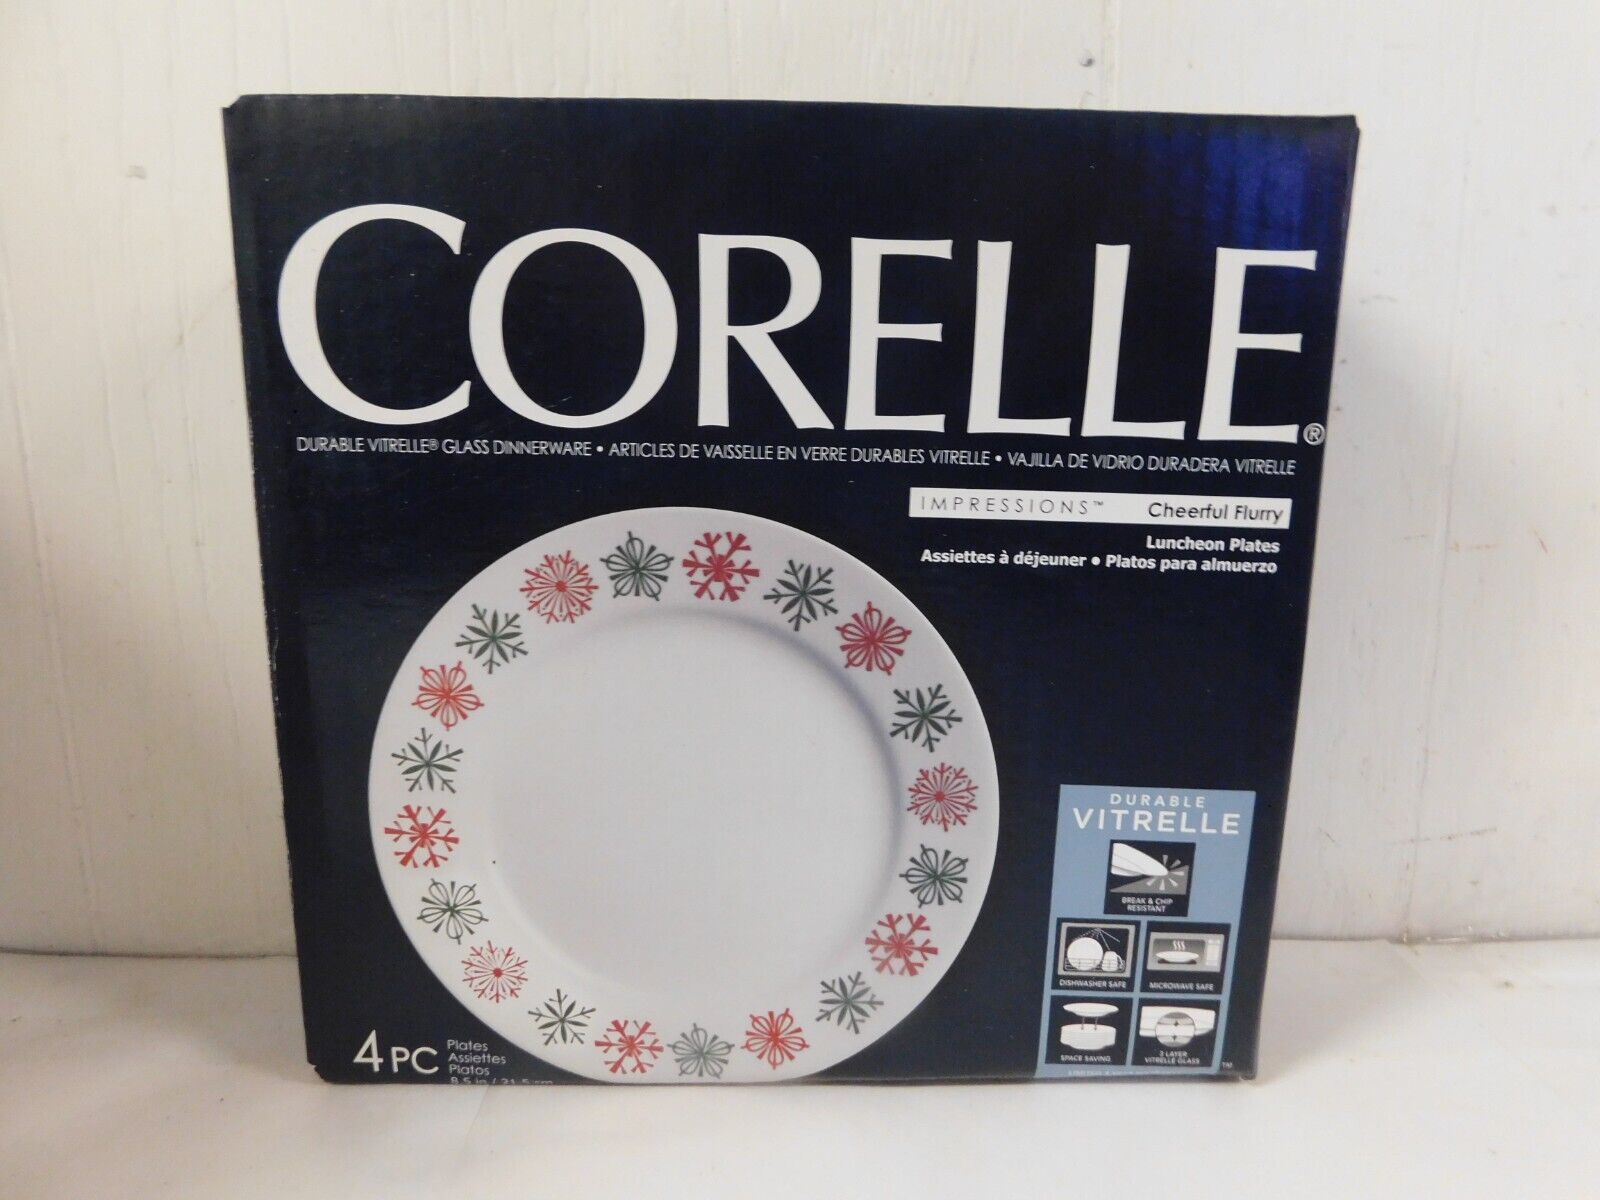 Corelle Impressions Cheerful Flurry 4 pc Luncheon Plates 8.5 